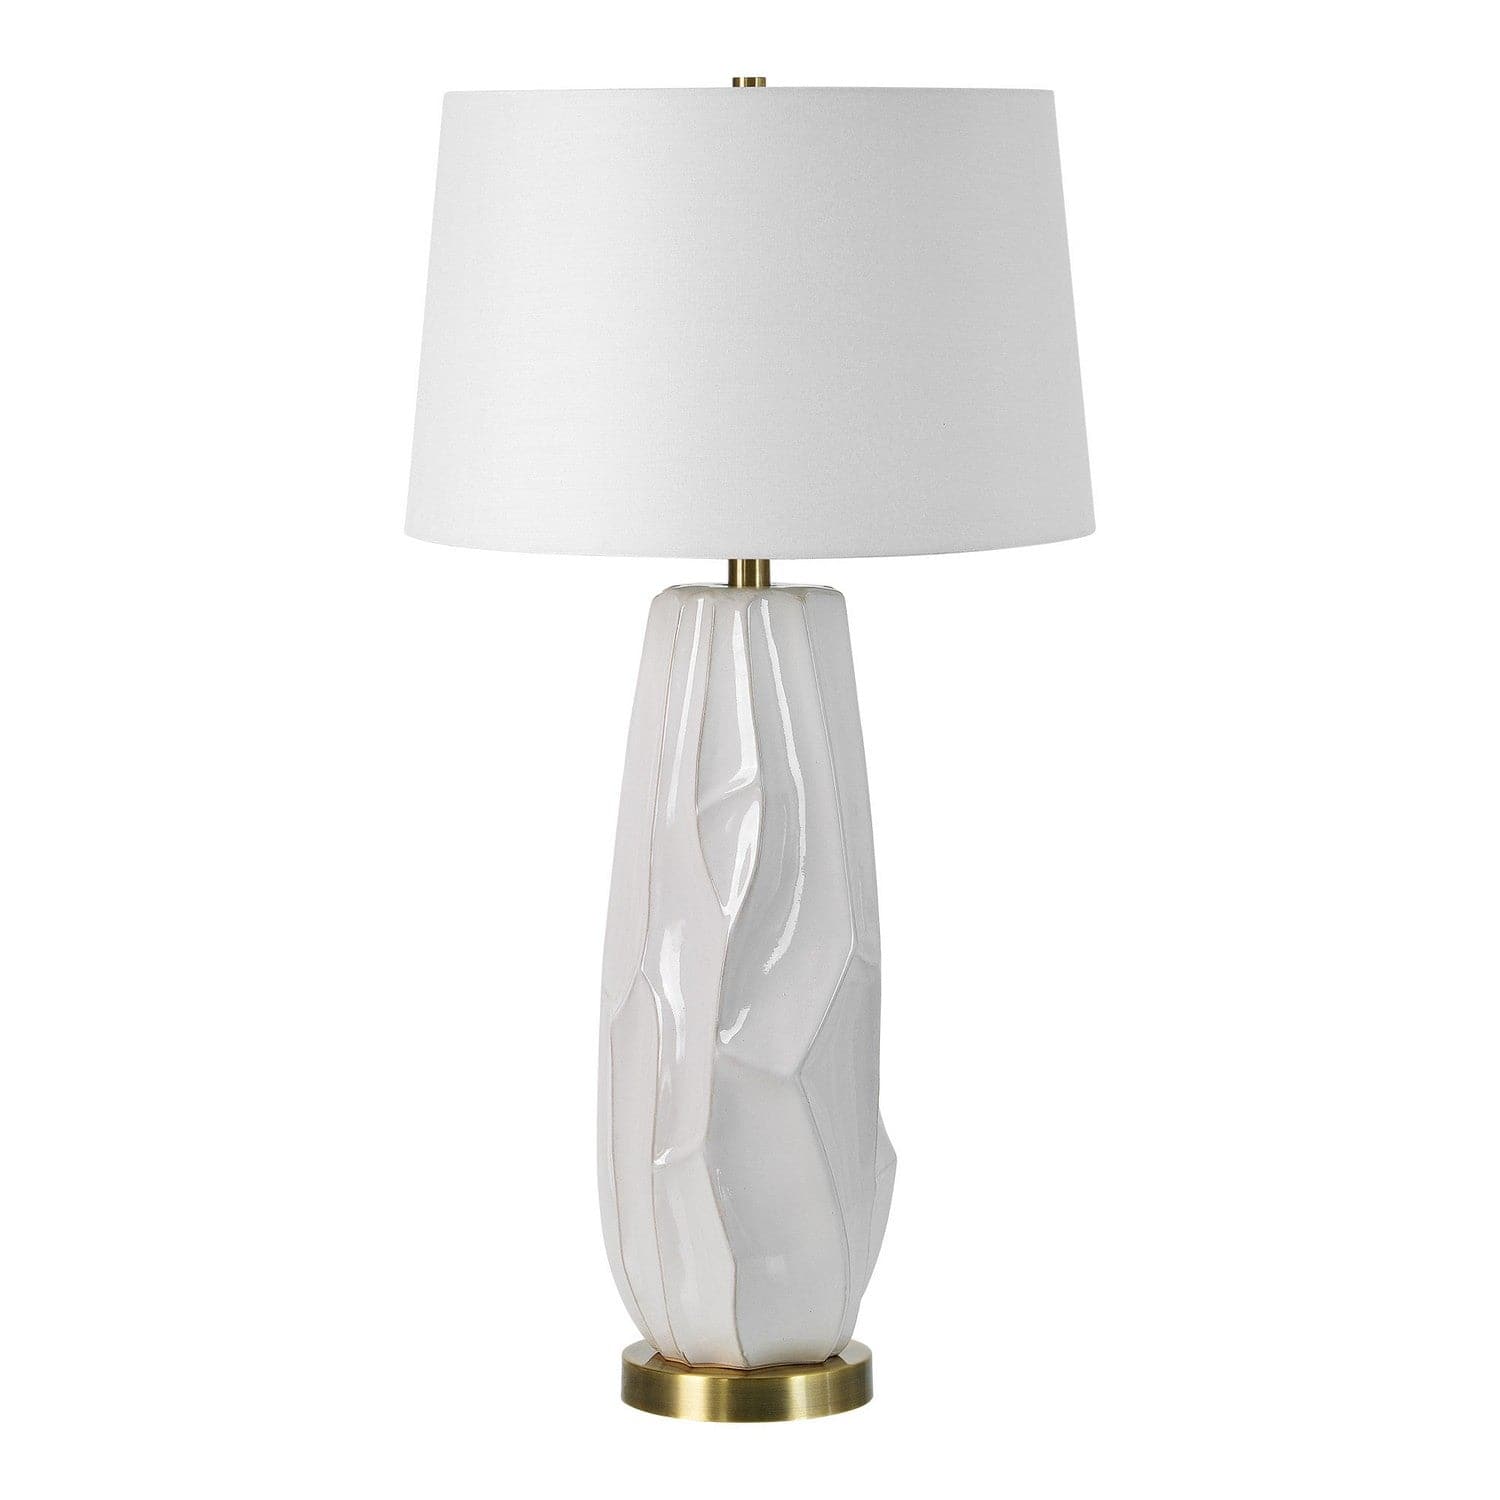 Renwil - LPT1226 - One Light Table Lamp - Jimmy - Off-White